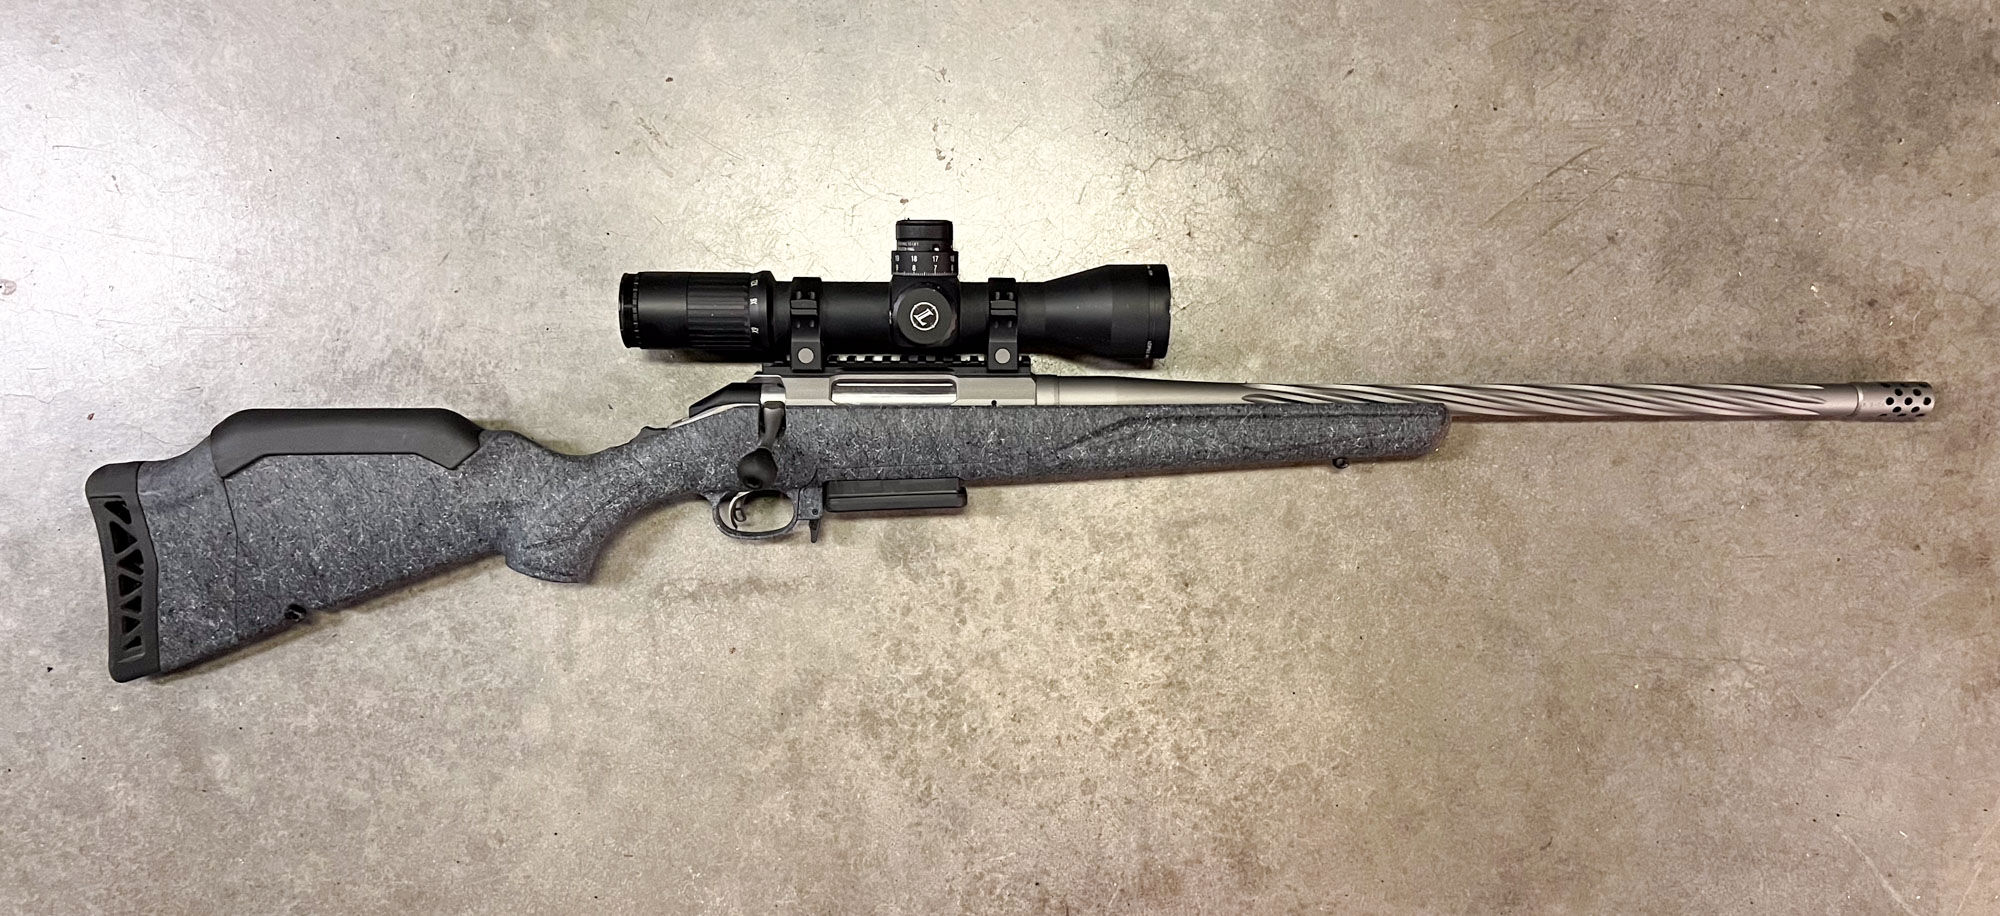 How To Upgrade Your Marlin 336 With Top Accessories? - jennifer